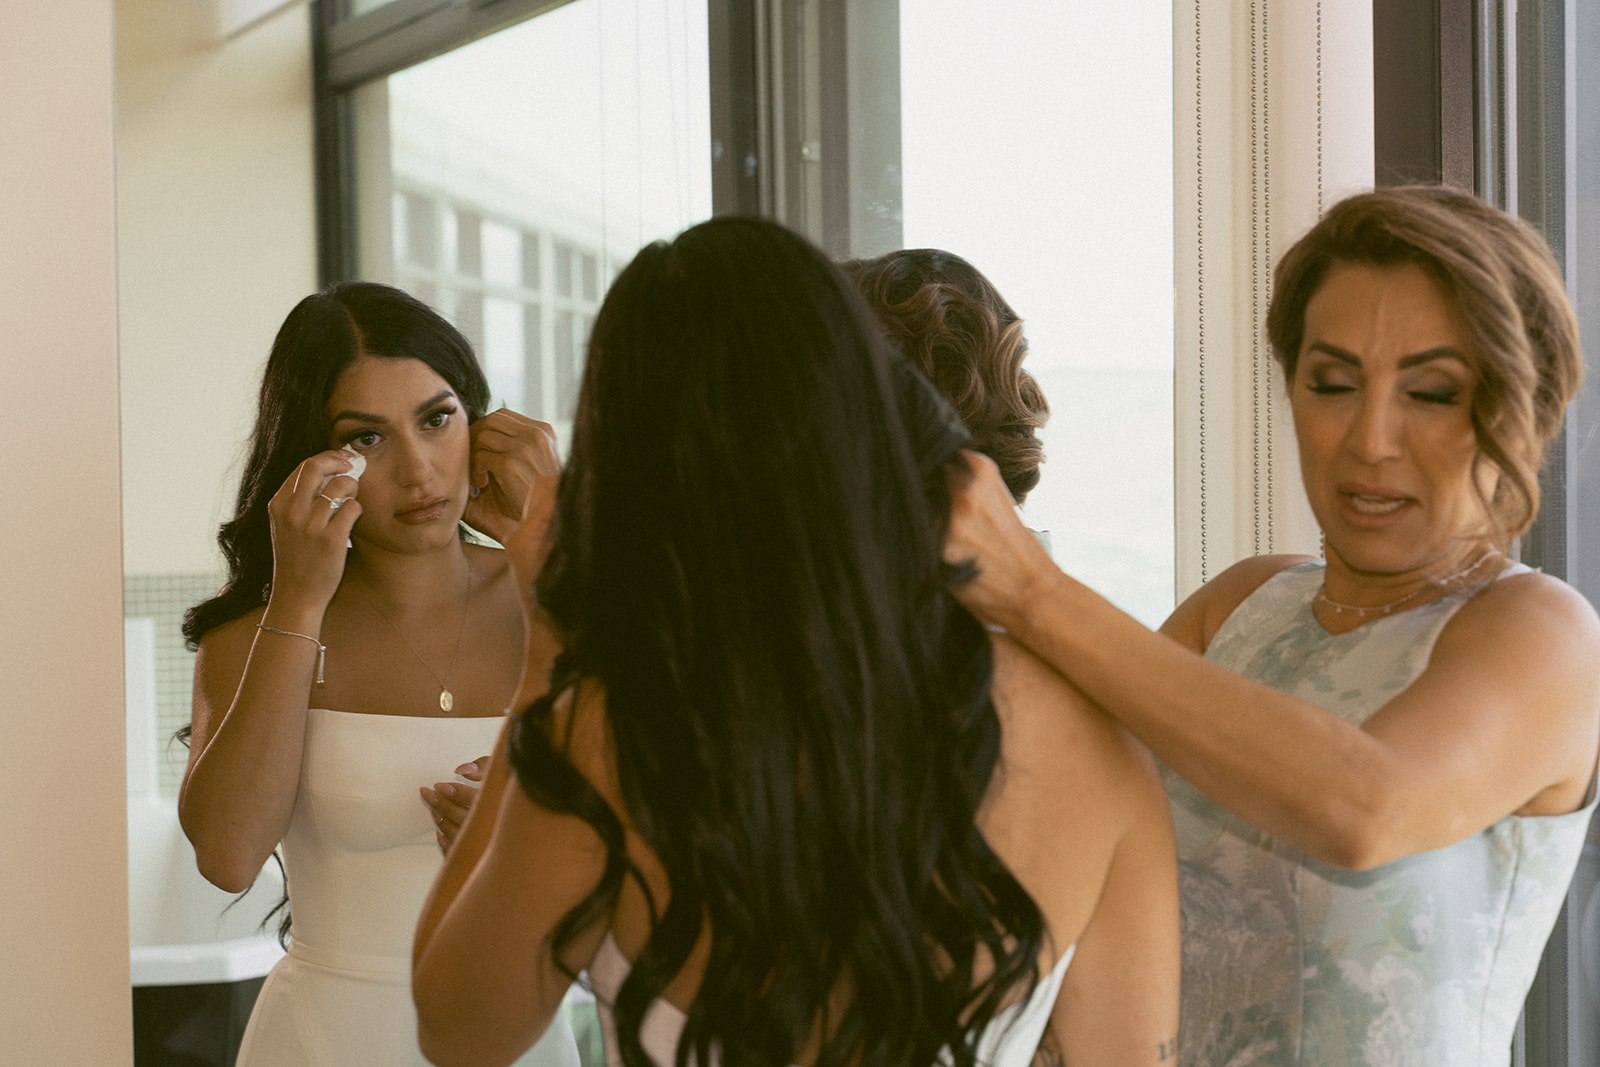 Details of putting on her wedding dress, mom and daughter crying